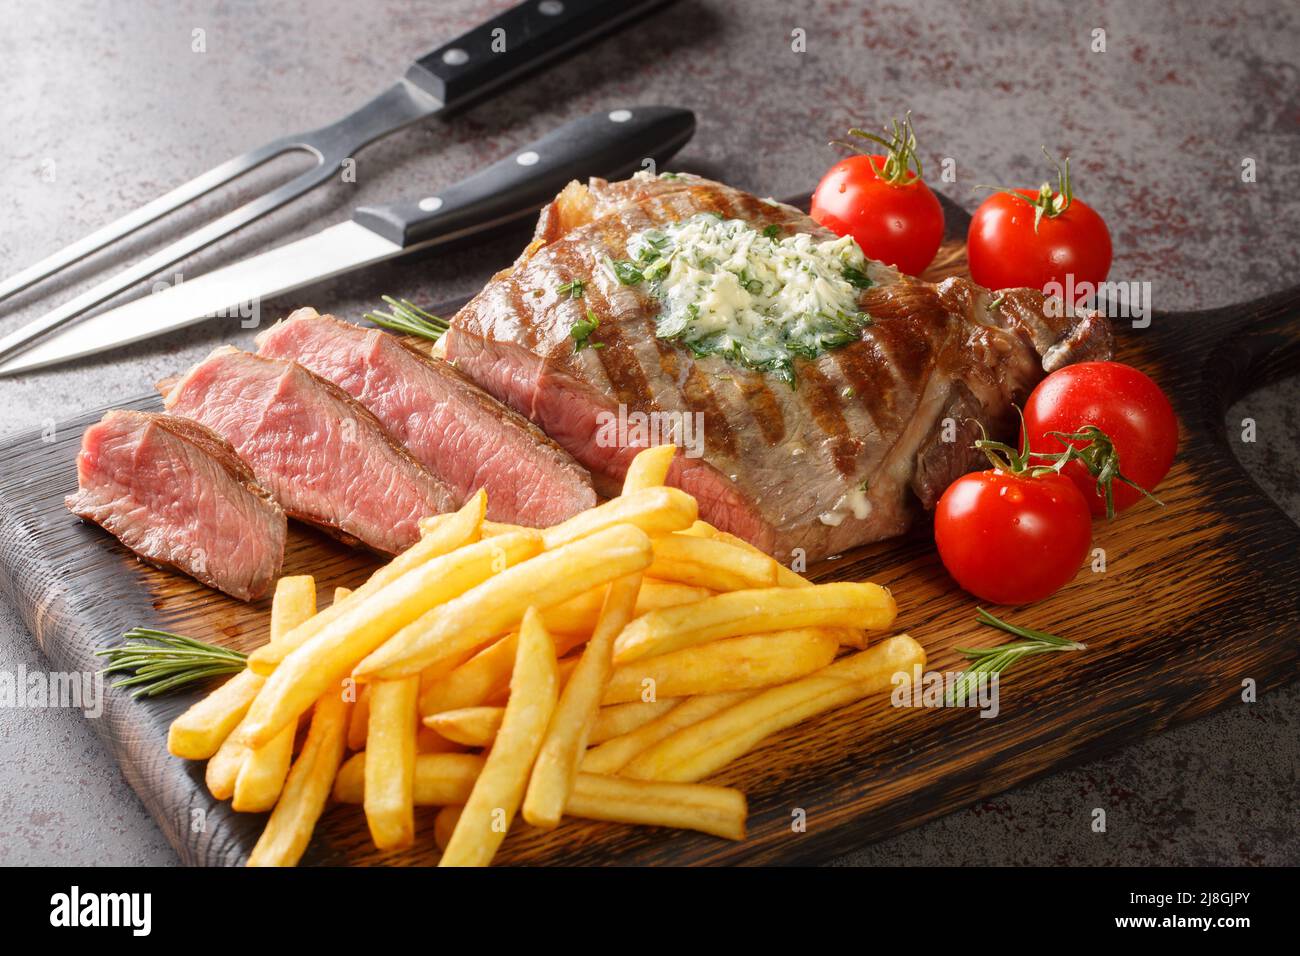 Freshly grilled steak with French Fries, green butter and tomatoes closeup on the wooden board on the table. Horizontal Stock Photo